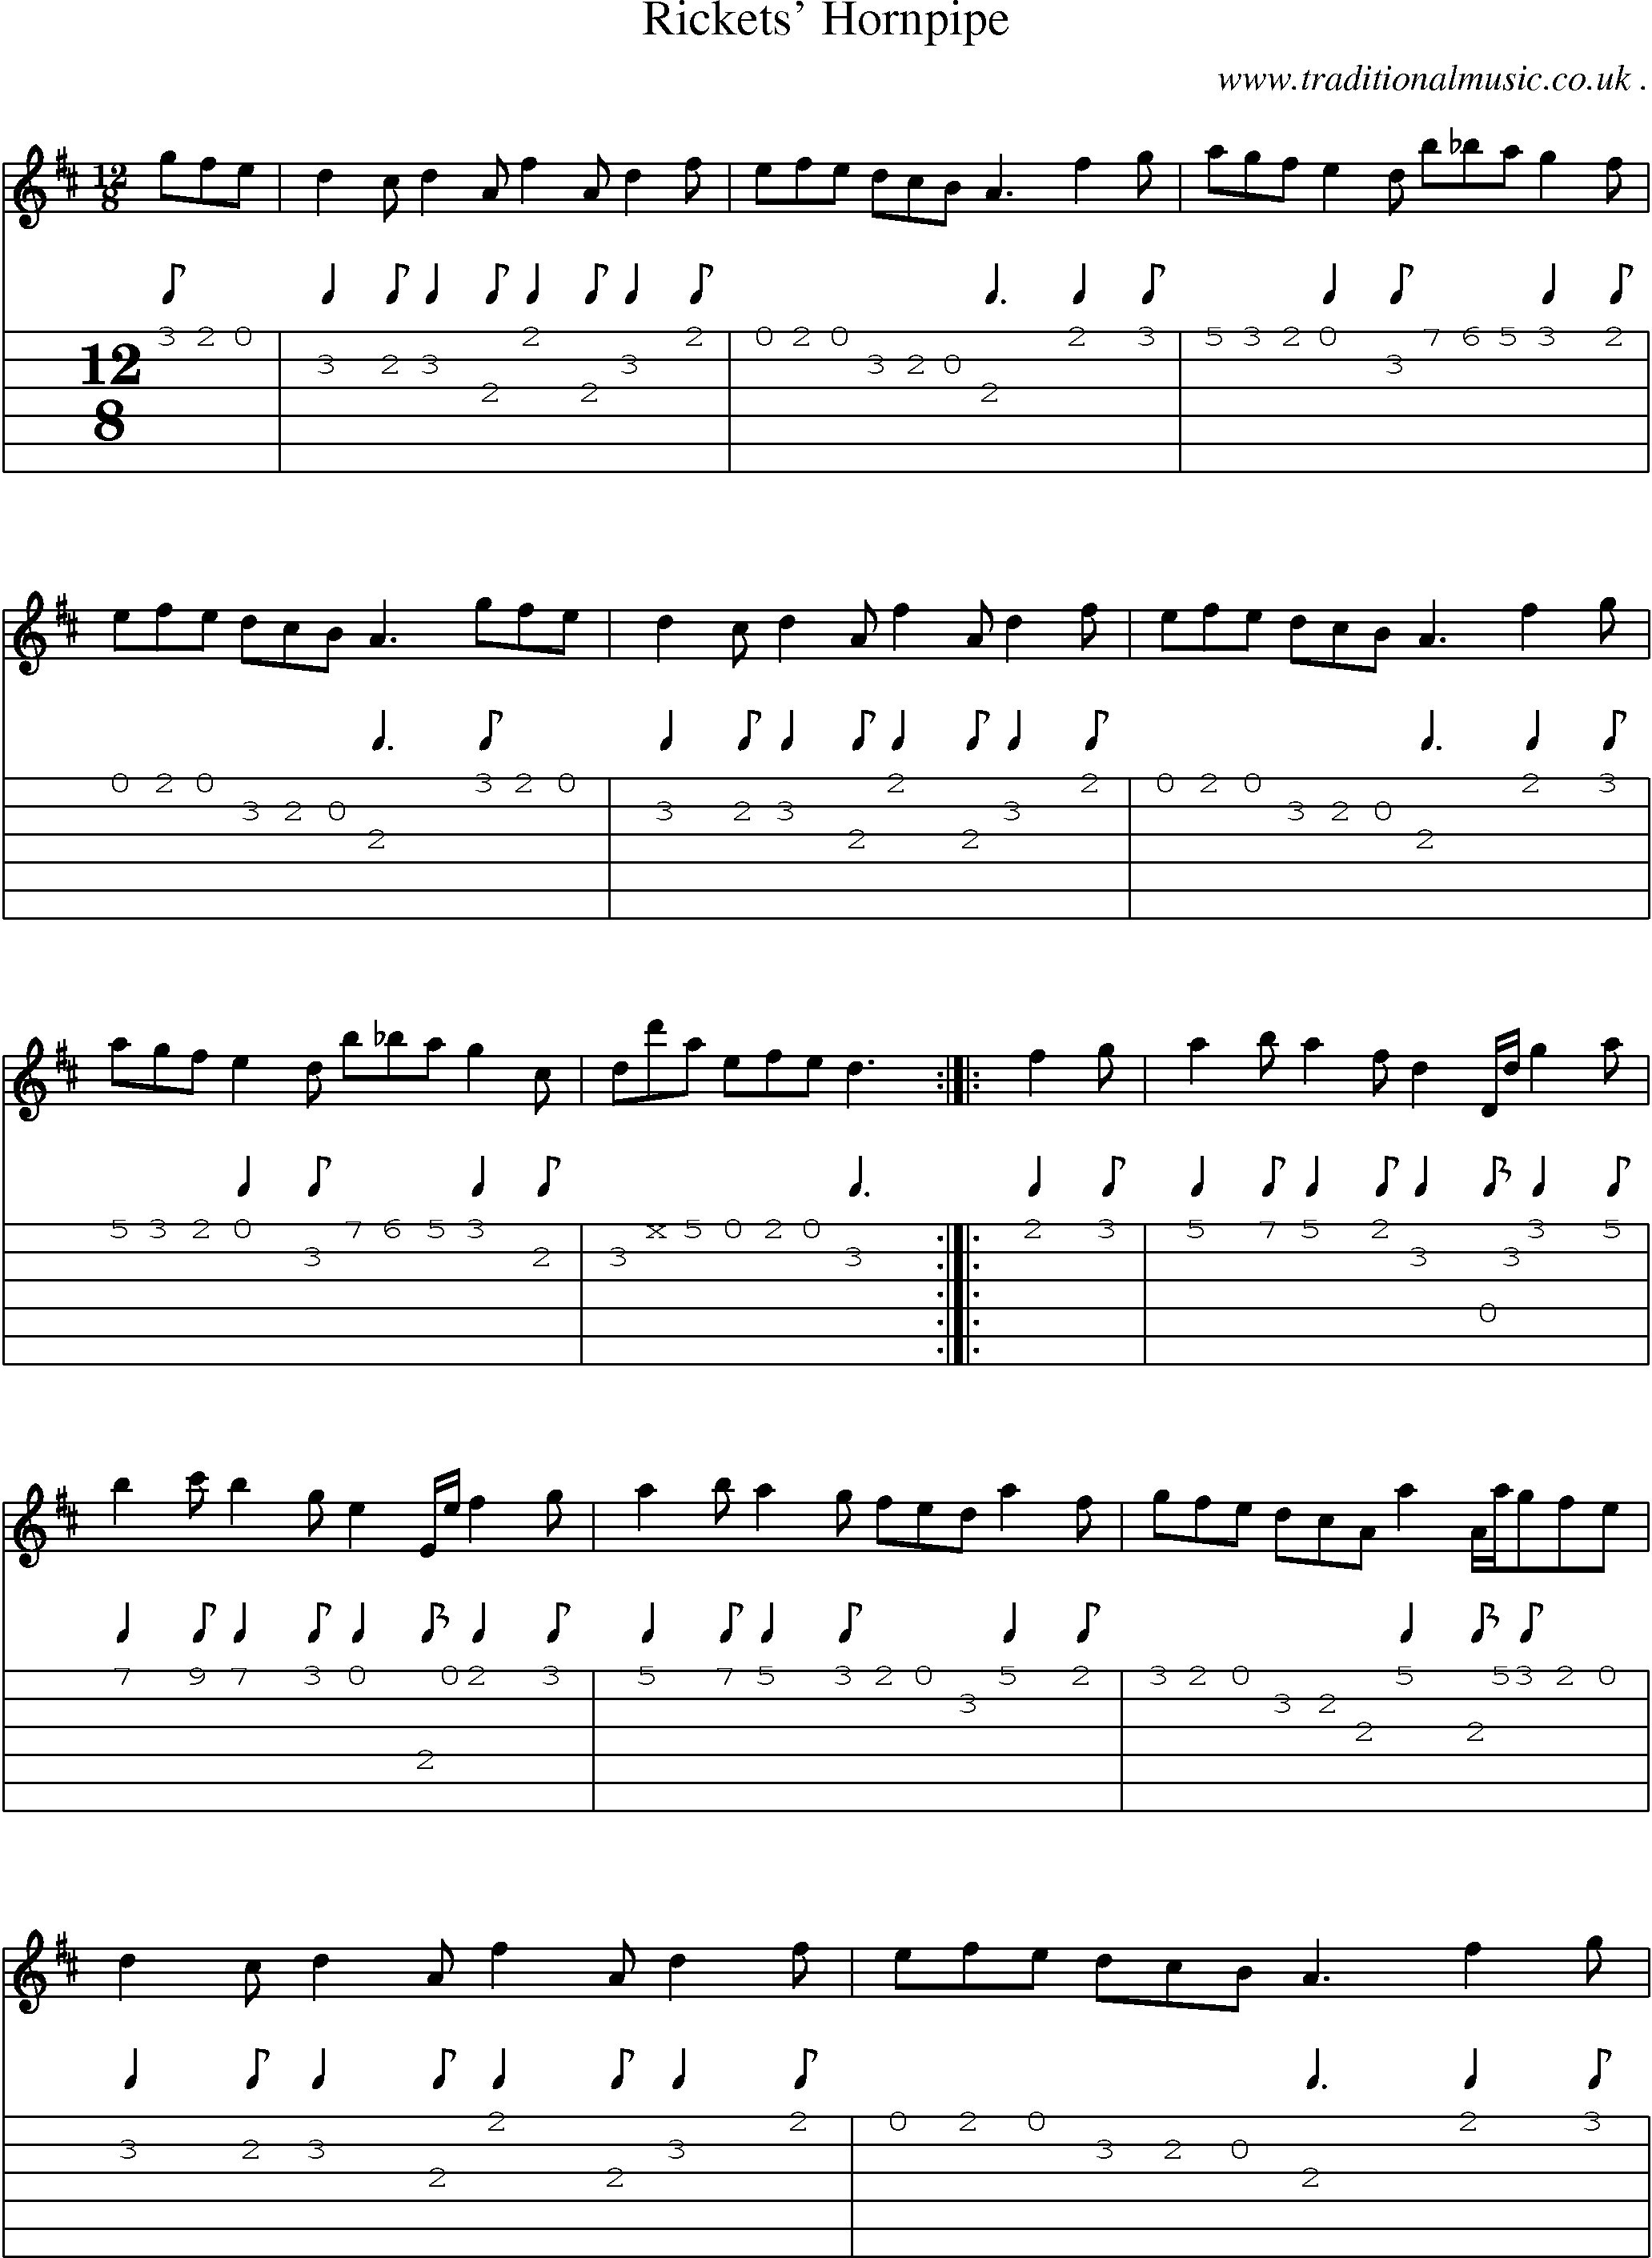 Sheet-Music and Guitar Tabs for Rickets Hornpipe